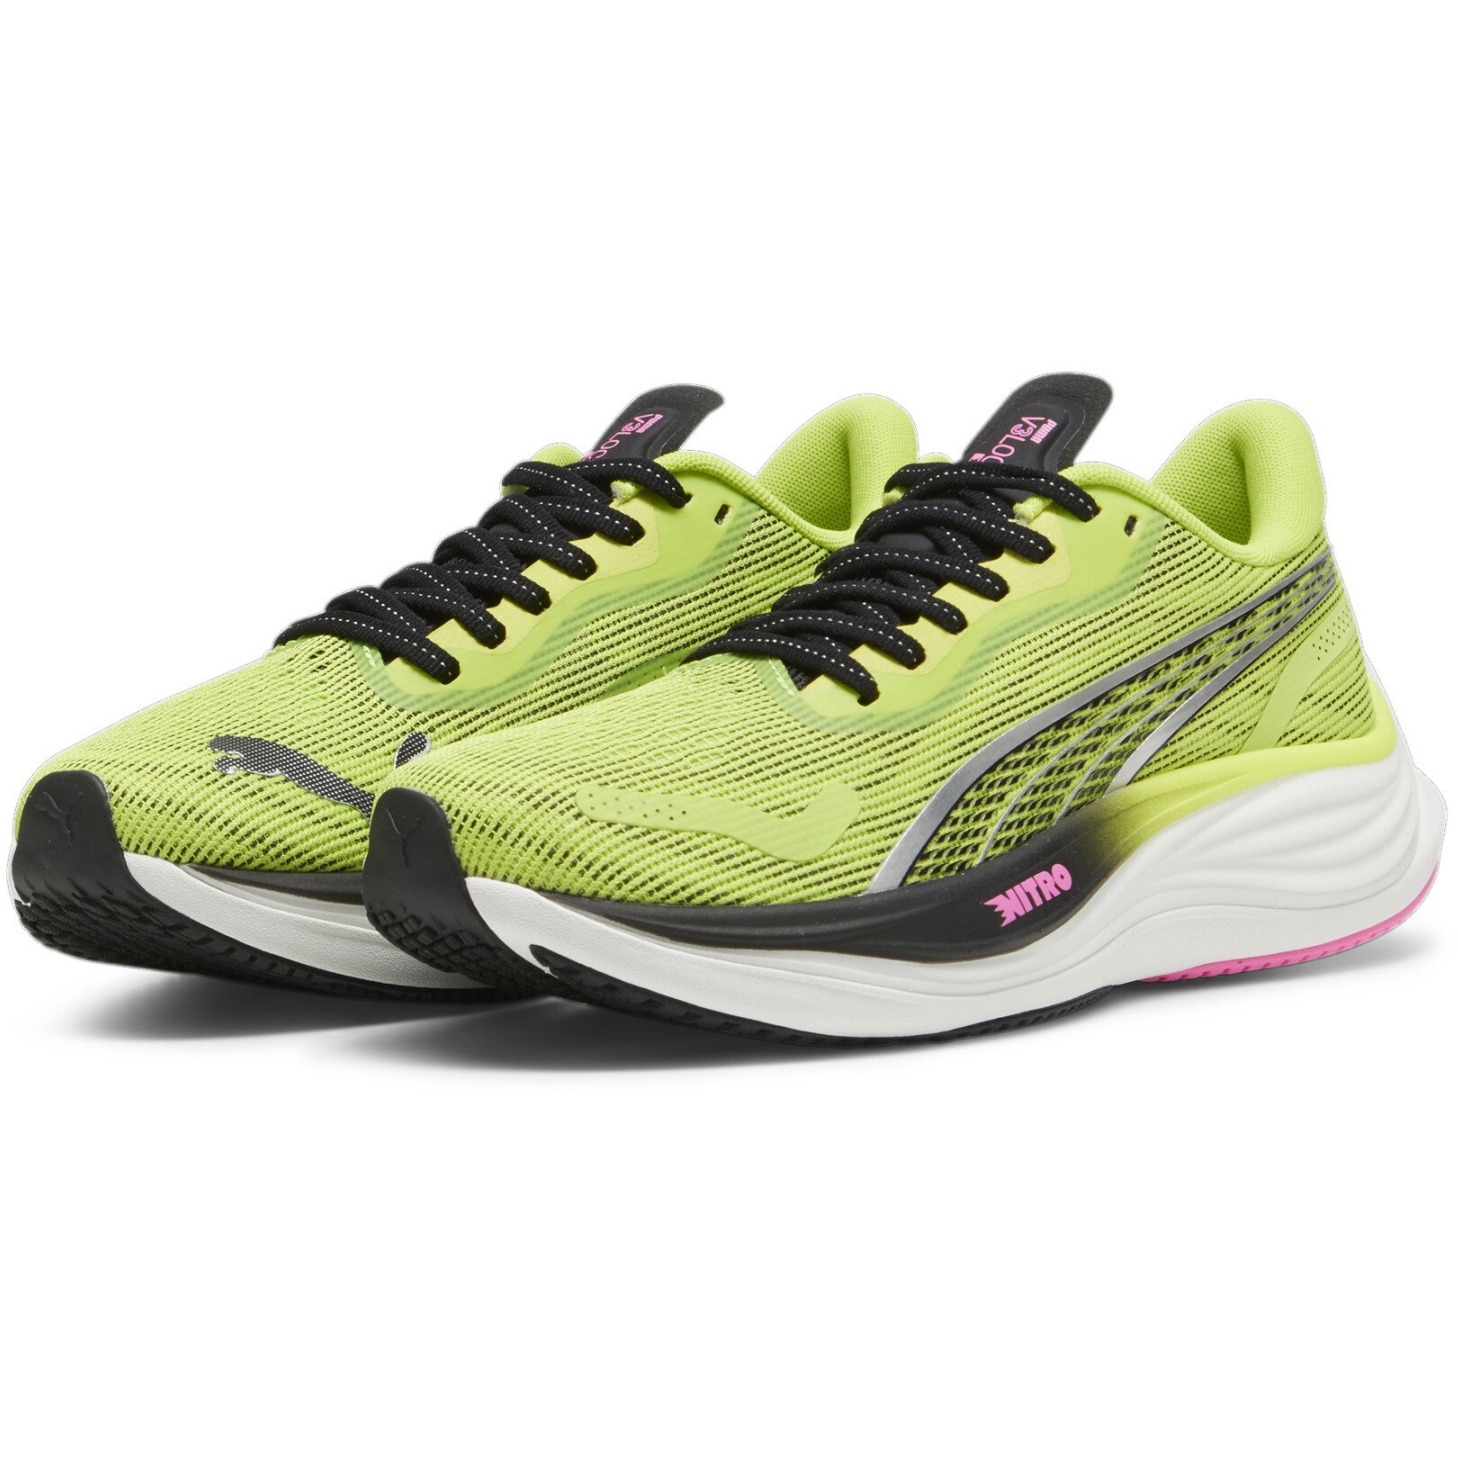 Picture of Puma Velocity Nitro 3 Psychedelic Rush Running Shoes Women - Lime Pow-Puma Black-Poison Pink